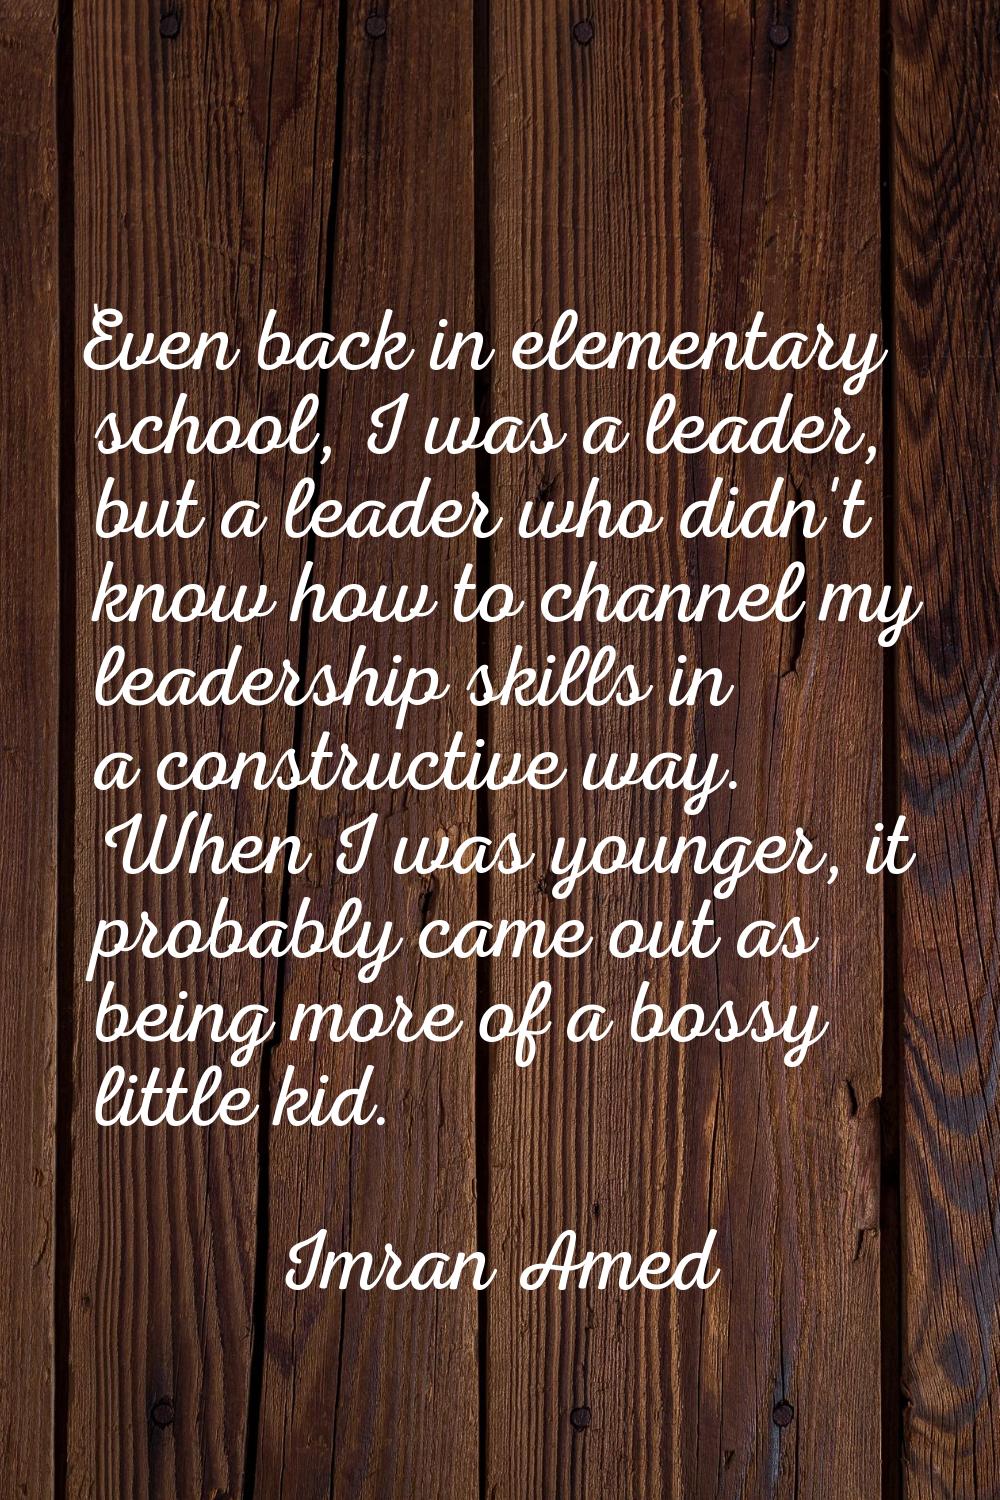 Even back in elementary school, I was a leader, but a leader who didn't know how to channel my lead